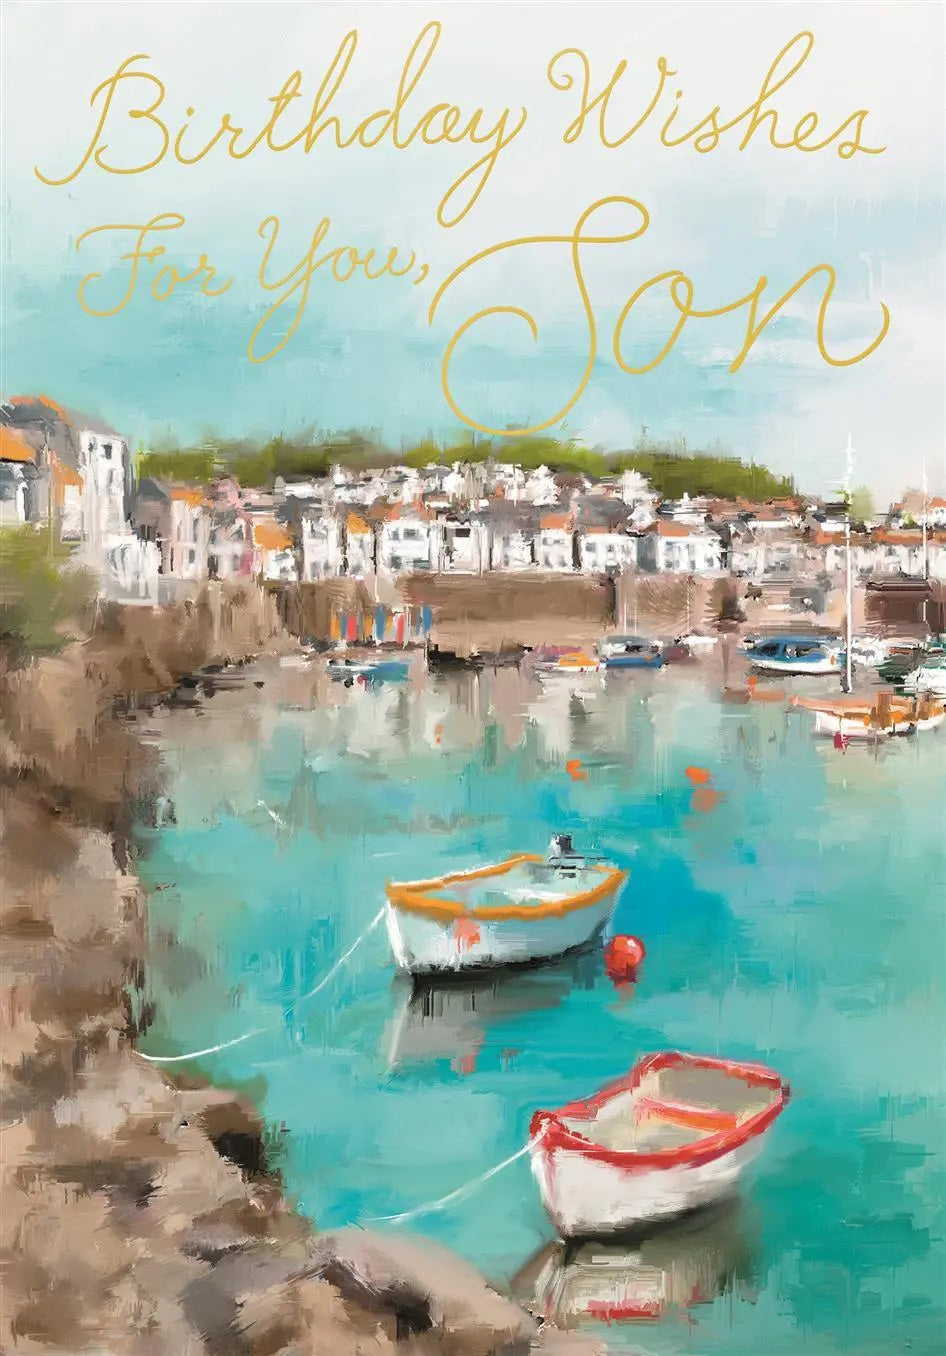 Son Birthday Card - Picturesque Boats